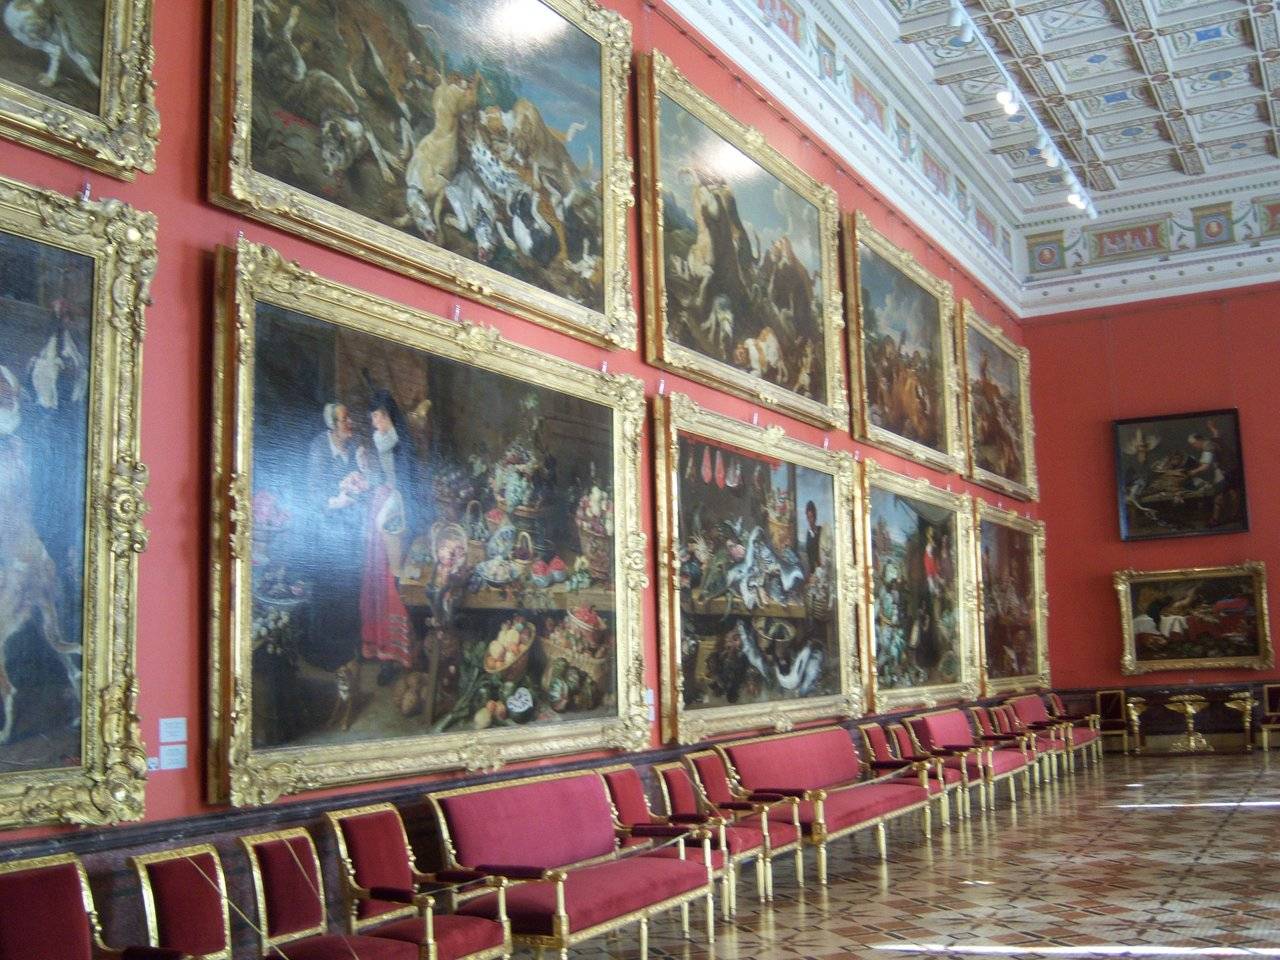 Art Gallery in the Hermitage